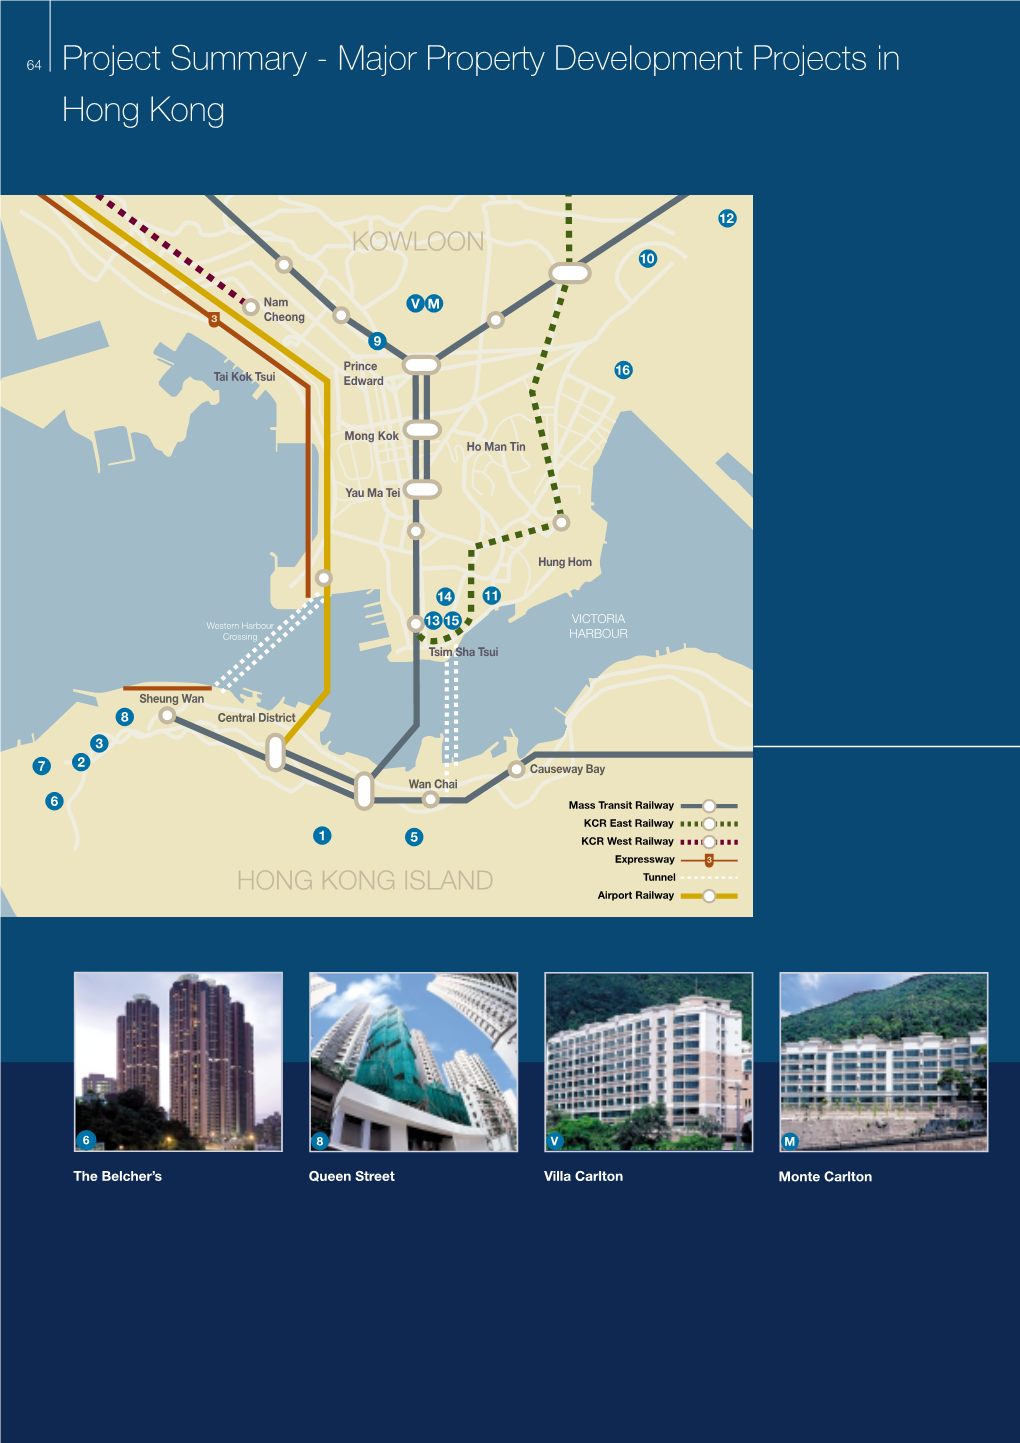 Major Property Development Projects in Hong Kong